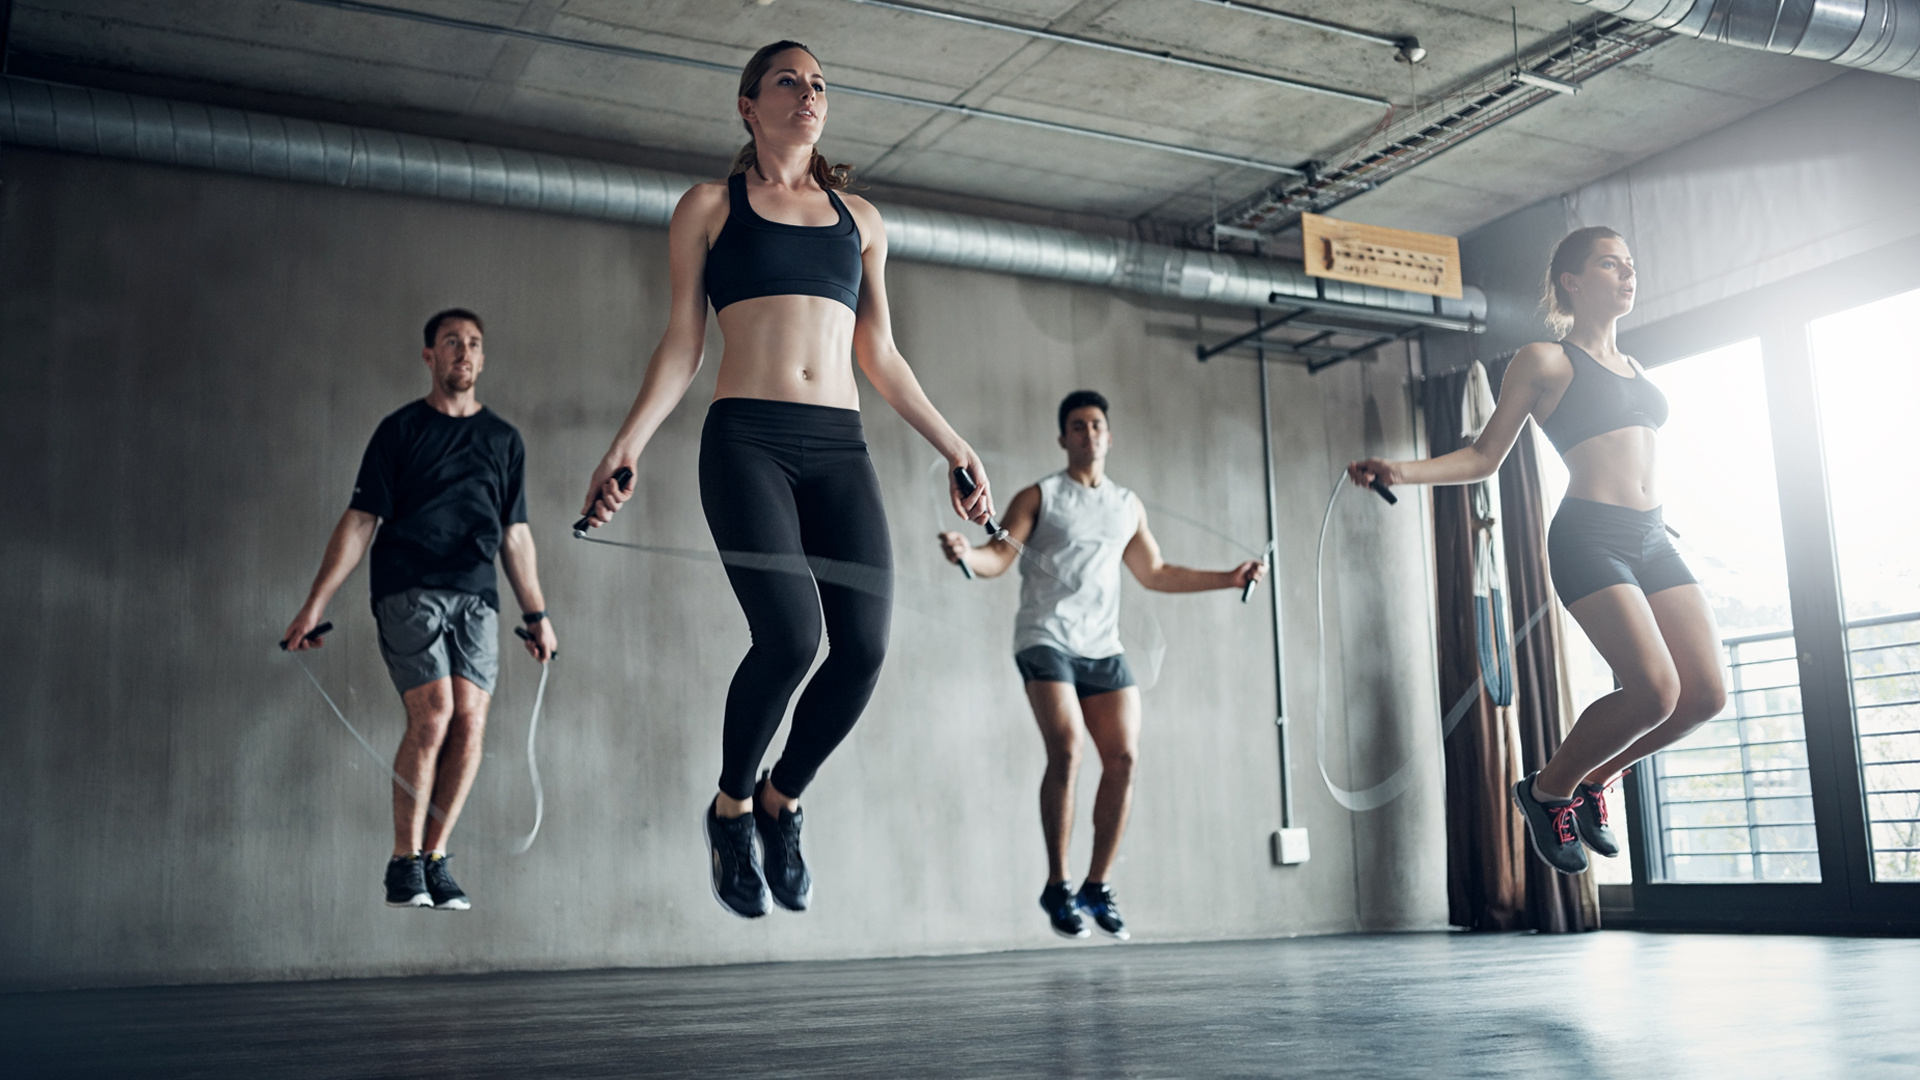 Rope Jumping: Skipping, Full body workout, Group fitness classes, Sports accessories, Jumping rope classes. 1920x1080 Full HD Background.